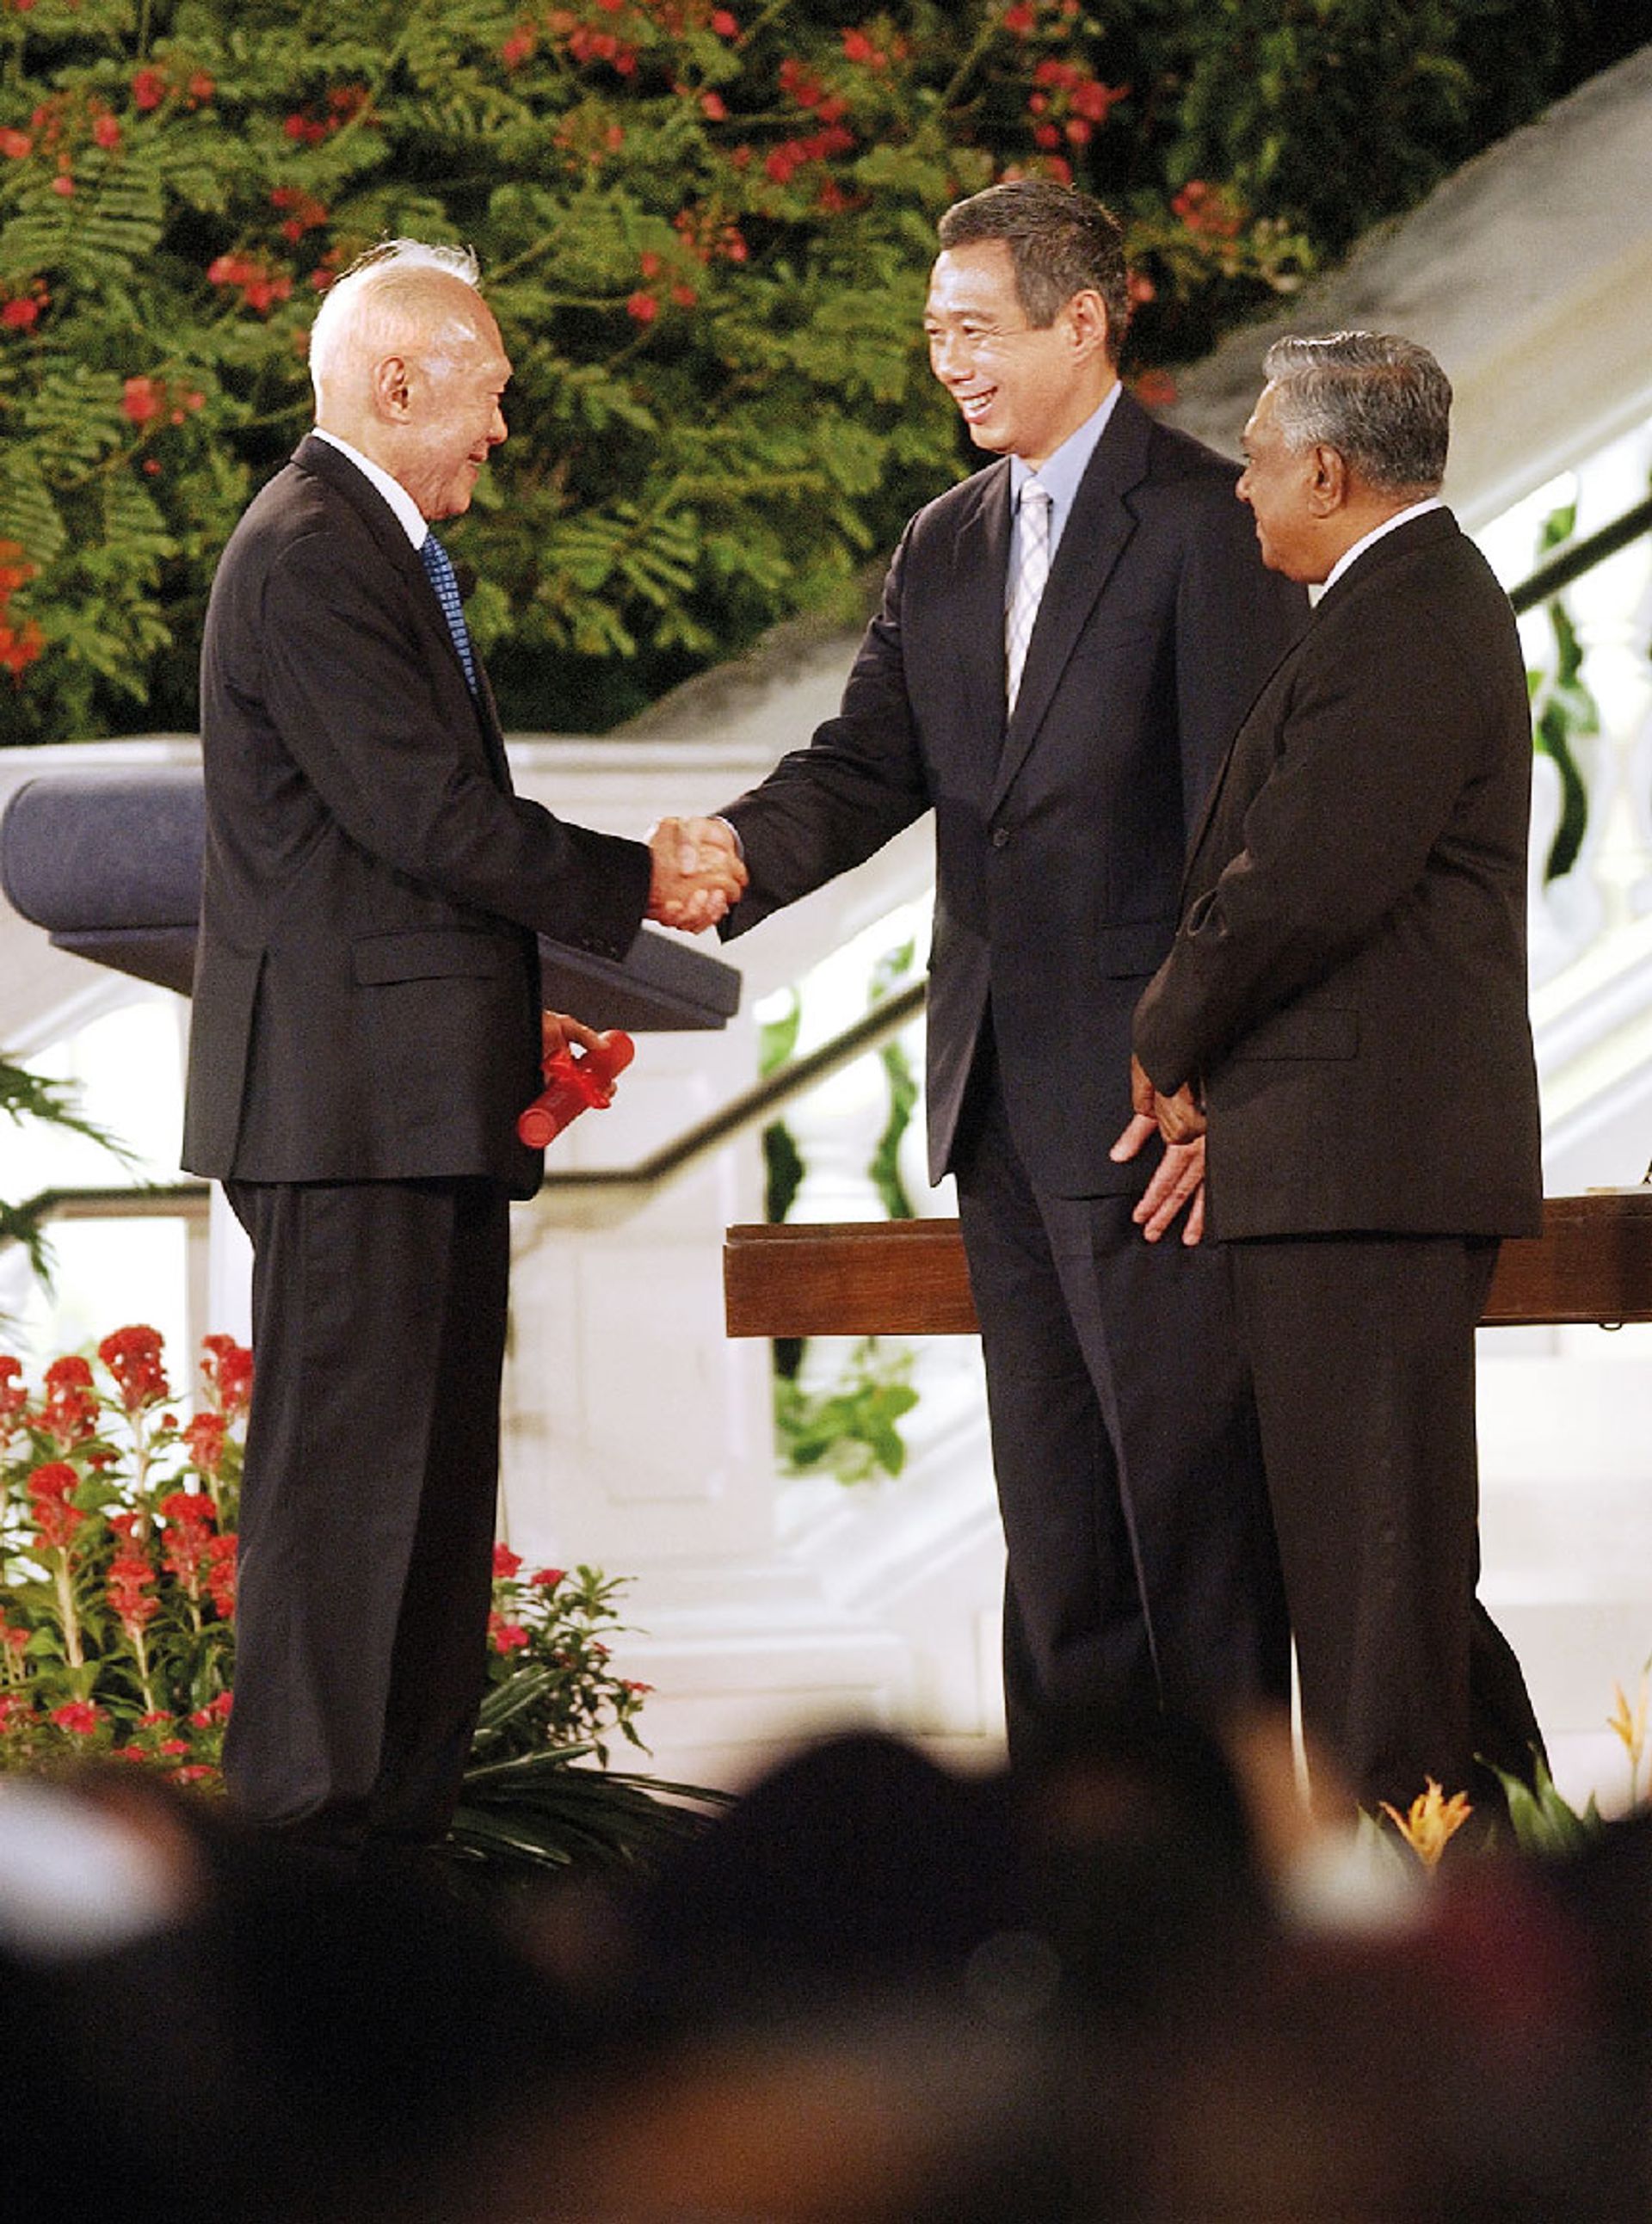 Mr Lee congratulating his son, Mr Lee Hsien Loong, after the latter was sworn in as Singapore’s third prime minister on Aug 12, 2004. The elder Mr Lee was appointed Minister Mentor by President S R Nathan (right). ST Photo: Joyce Fang